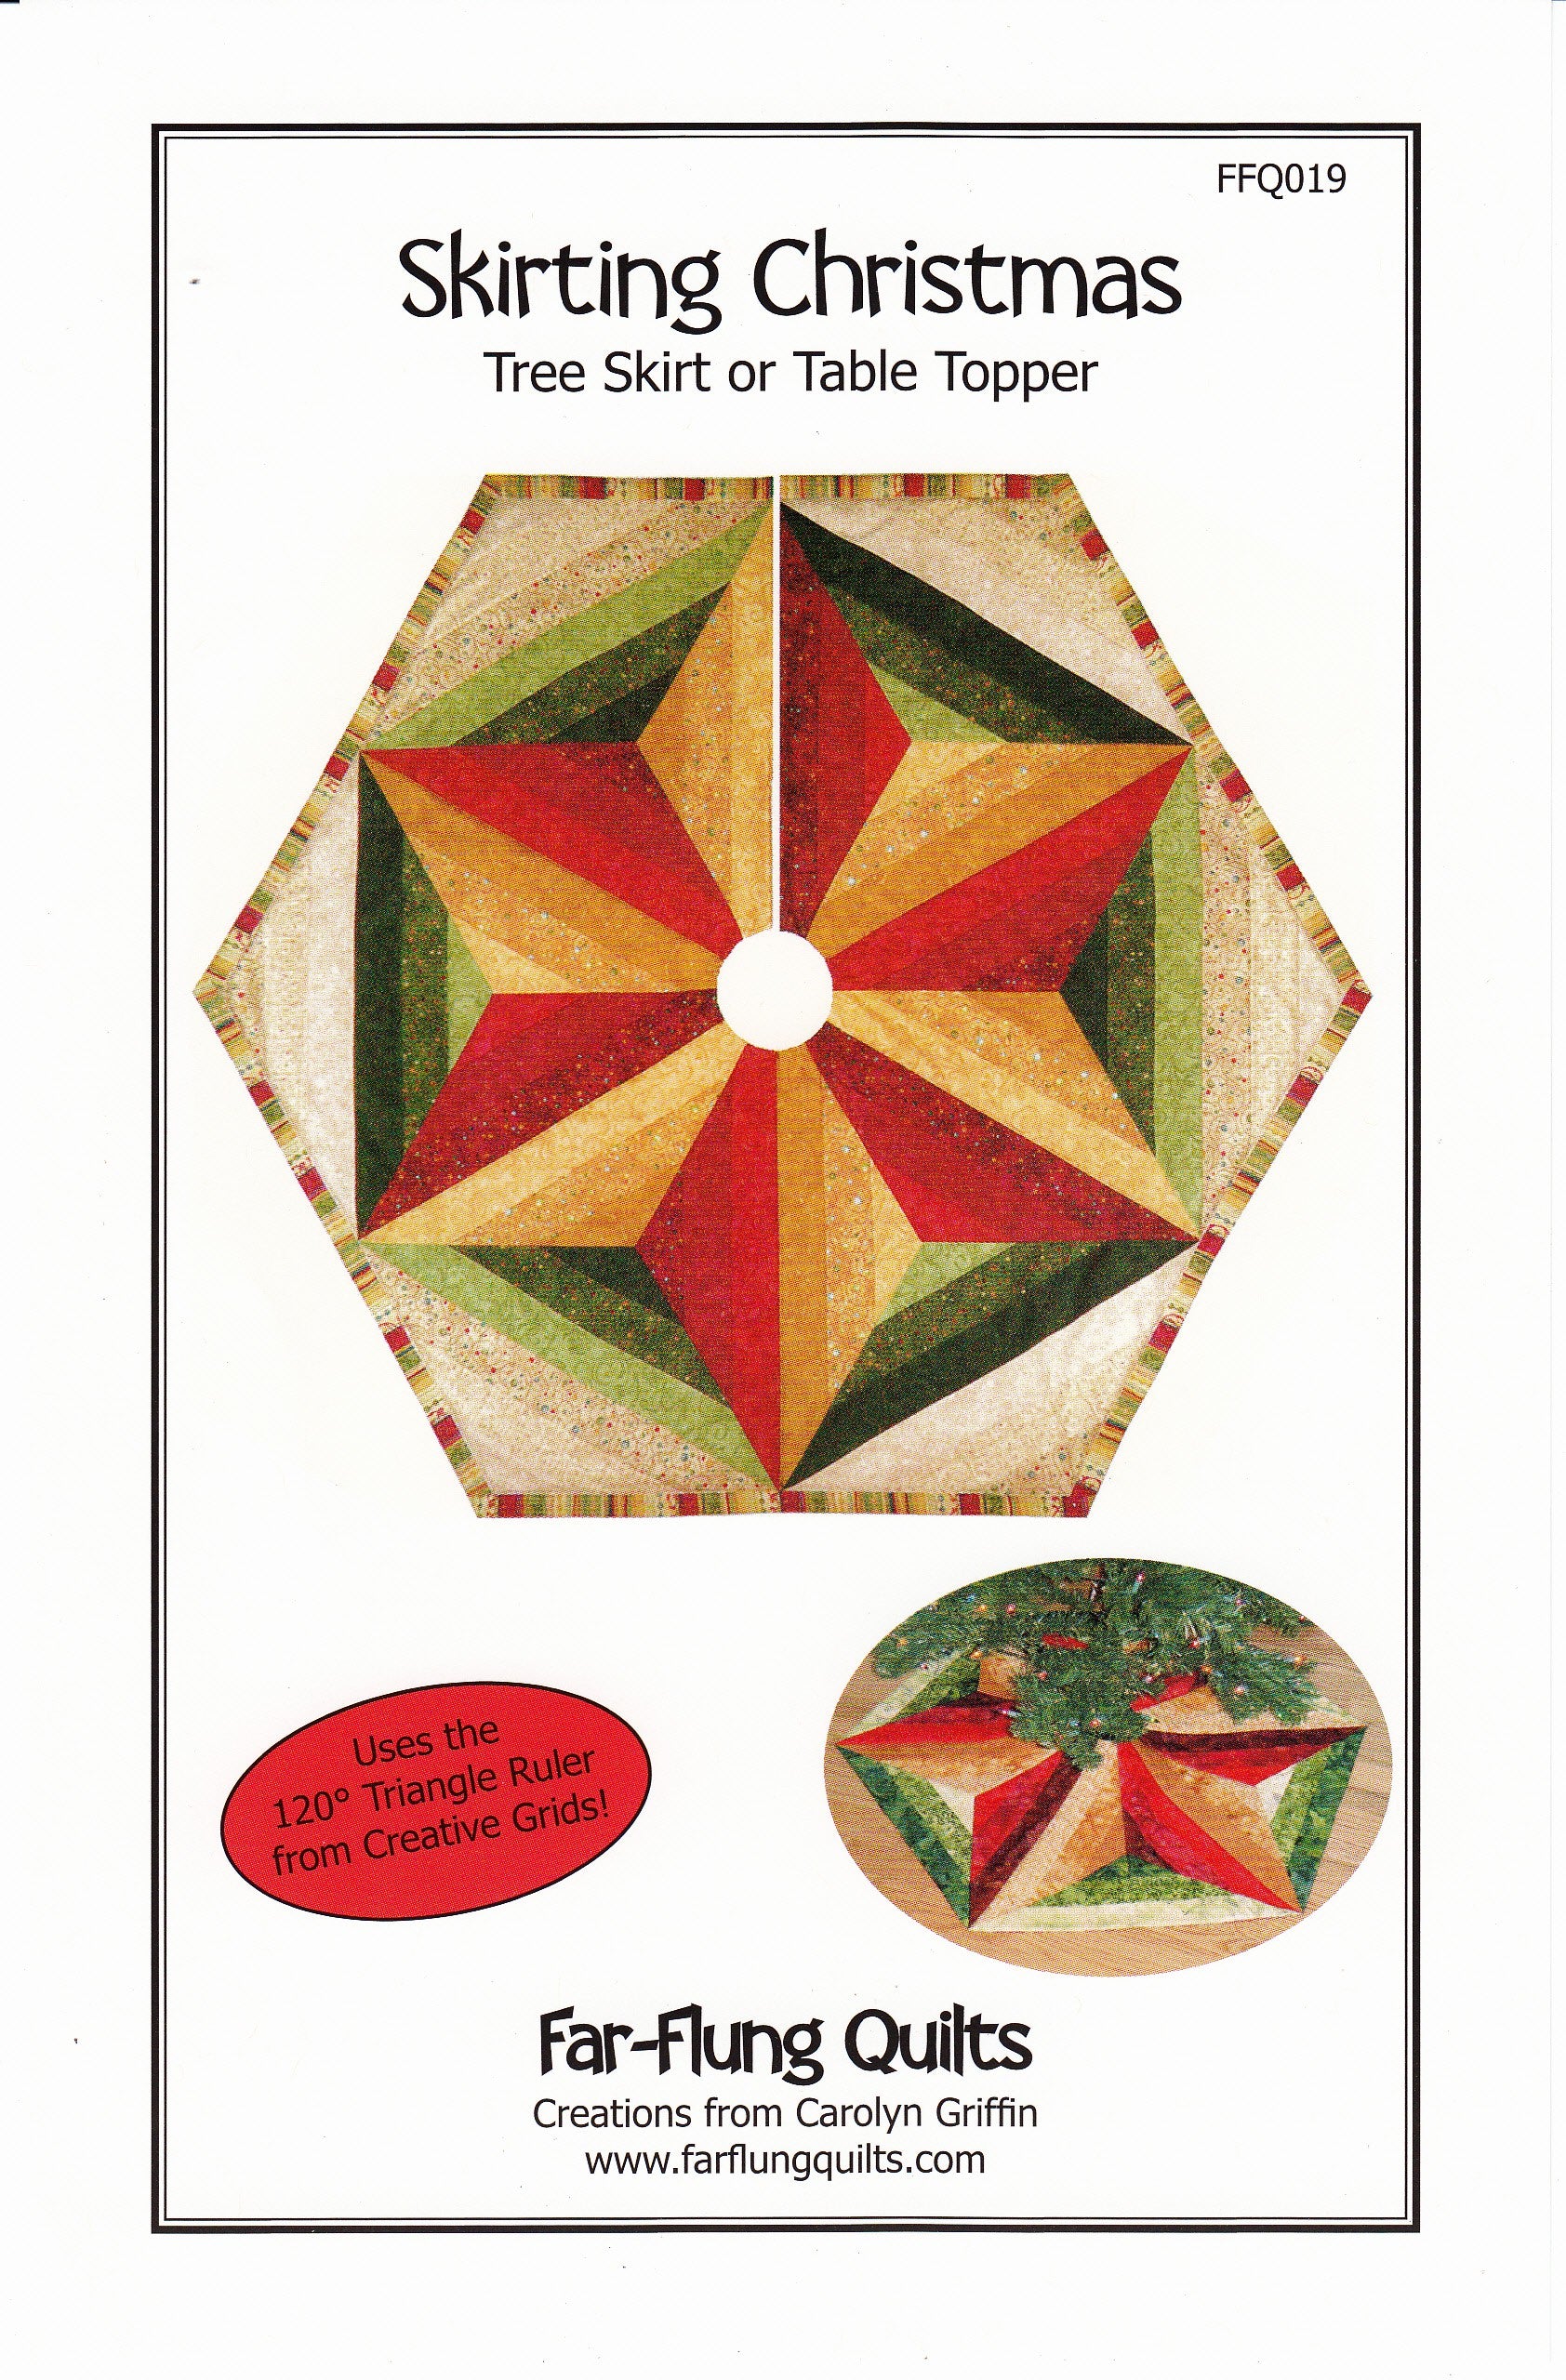 Skirting Christmas Tree Skirt or Table Topper Quilt Pattern by Carolyn Griffin of Far-Flung Quilts